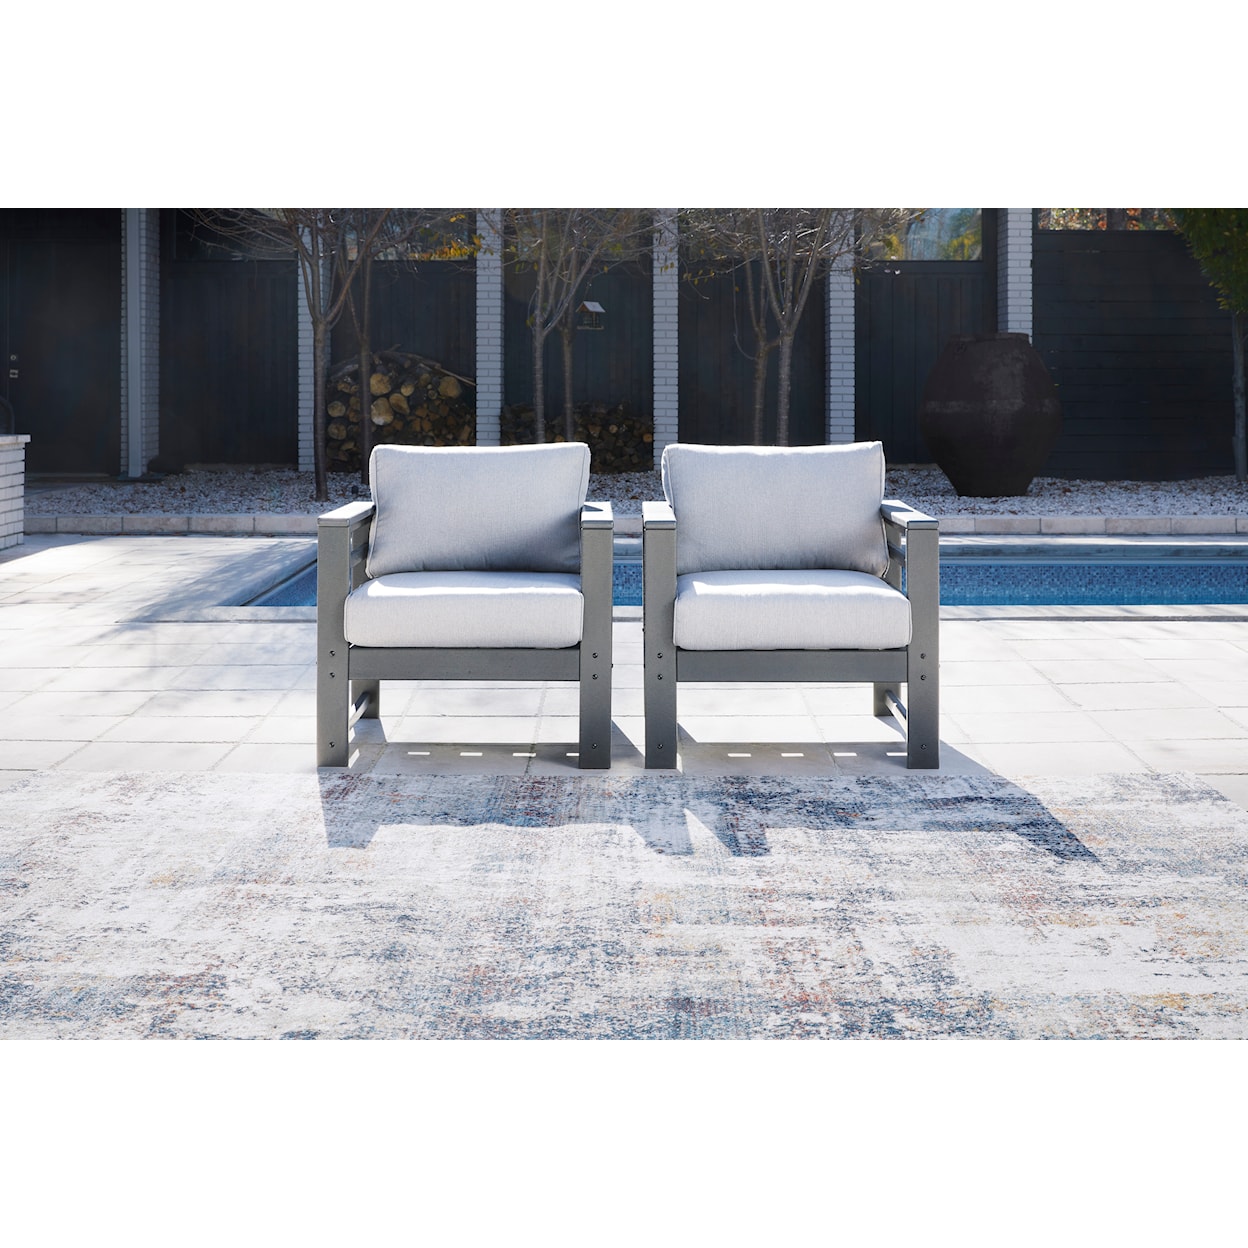 Signature Design by Ashley Amora Outdoor Lounge Chair with Cushion (Set of 2)